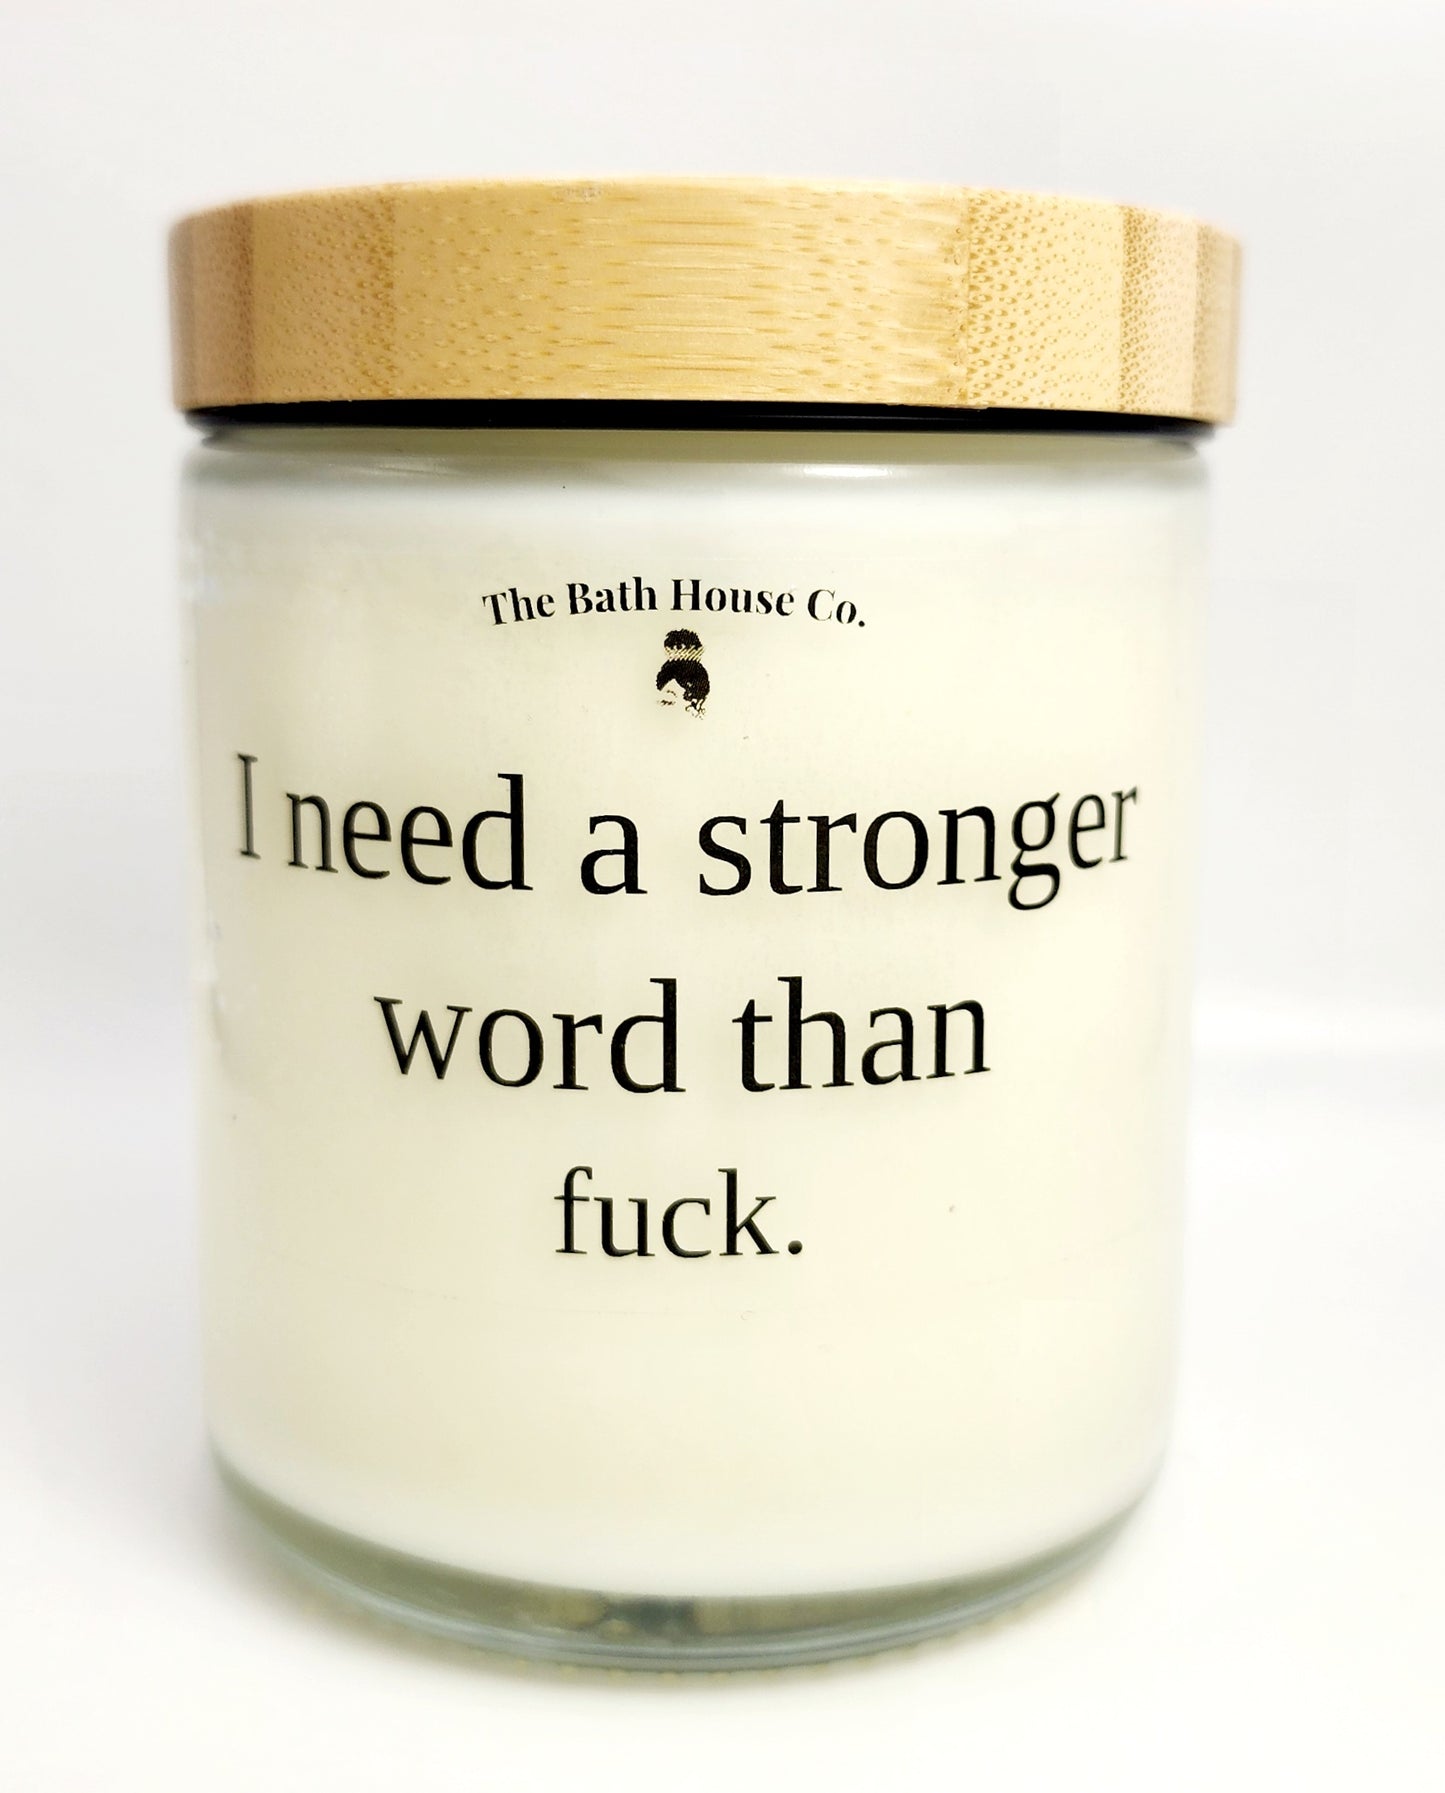 I need a stronger word than fuck